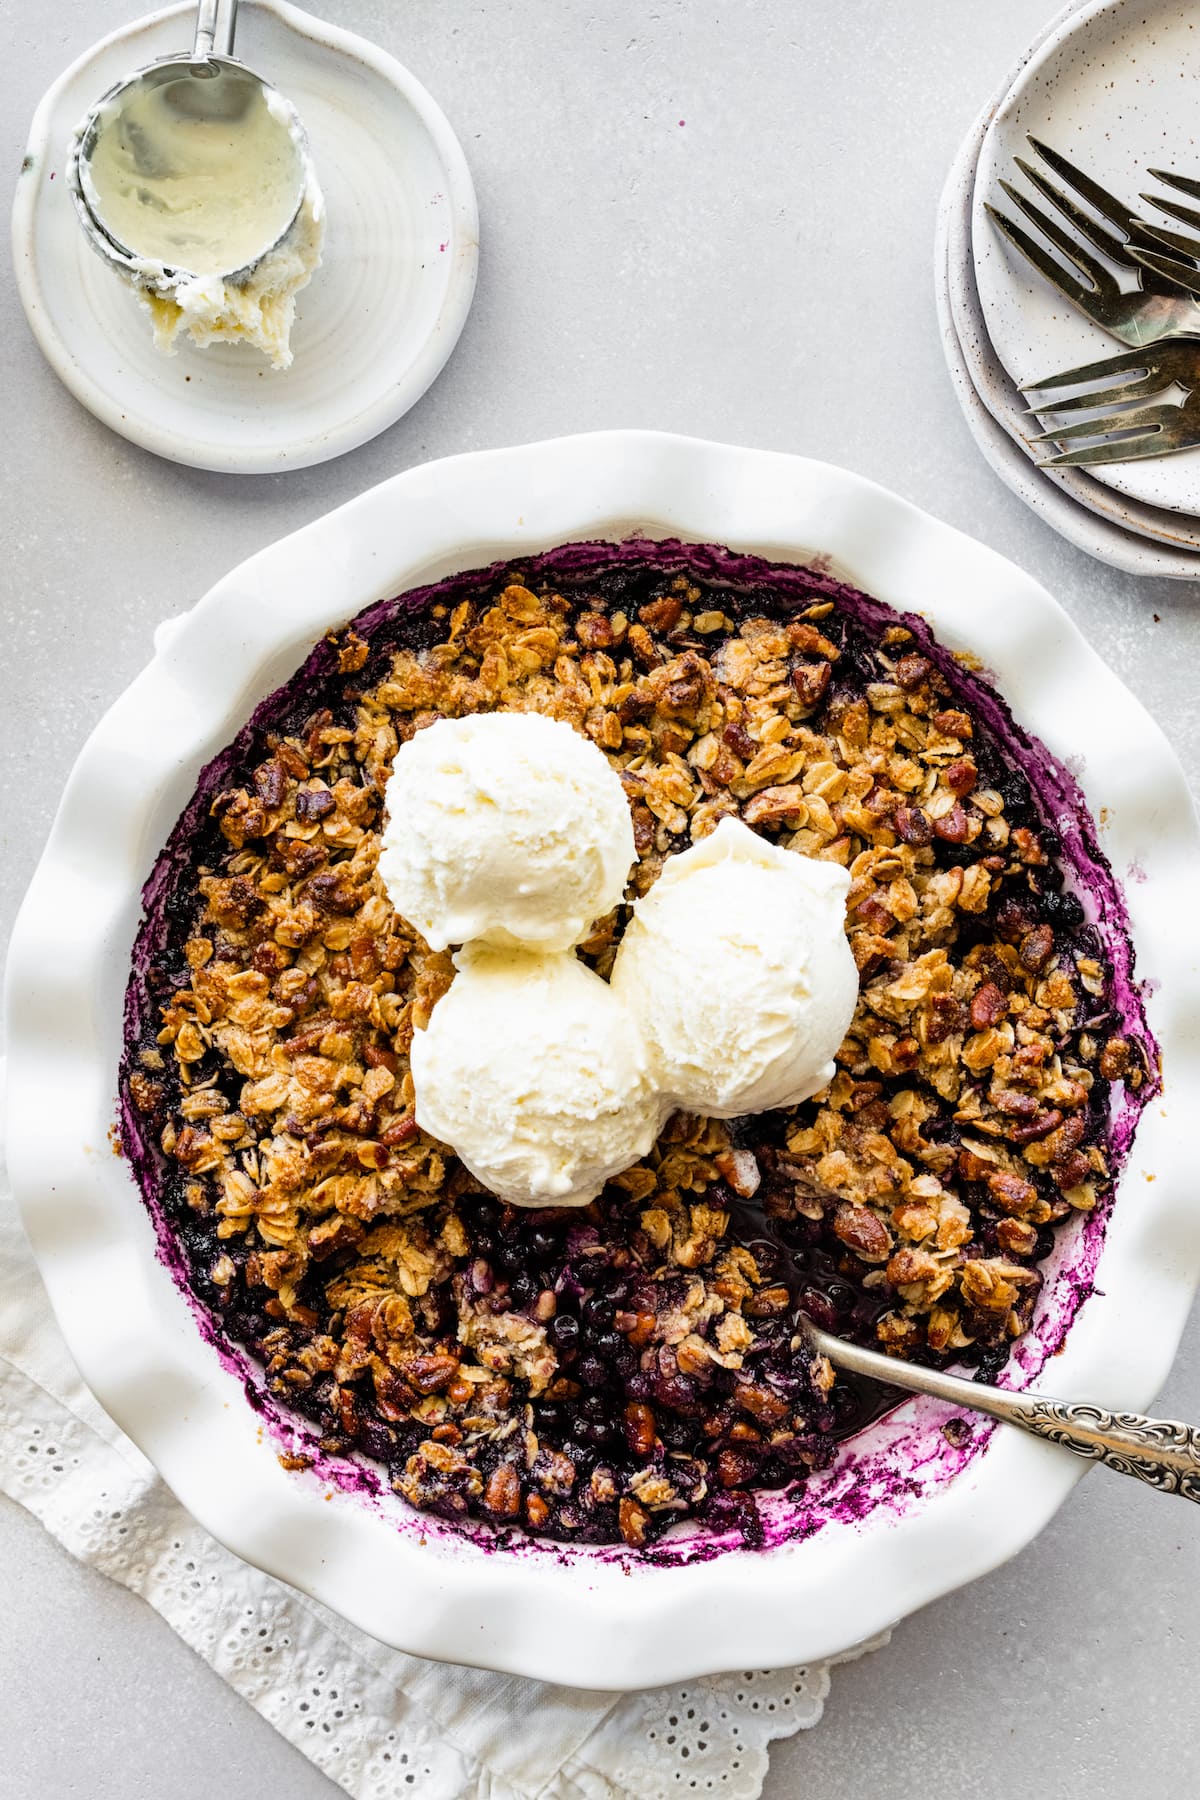 Blueberry Crumble in a pie dish with three scoops of vanilla ice cream on top and a metal spoon.